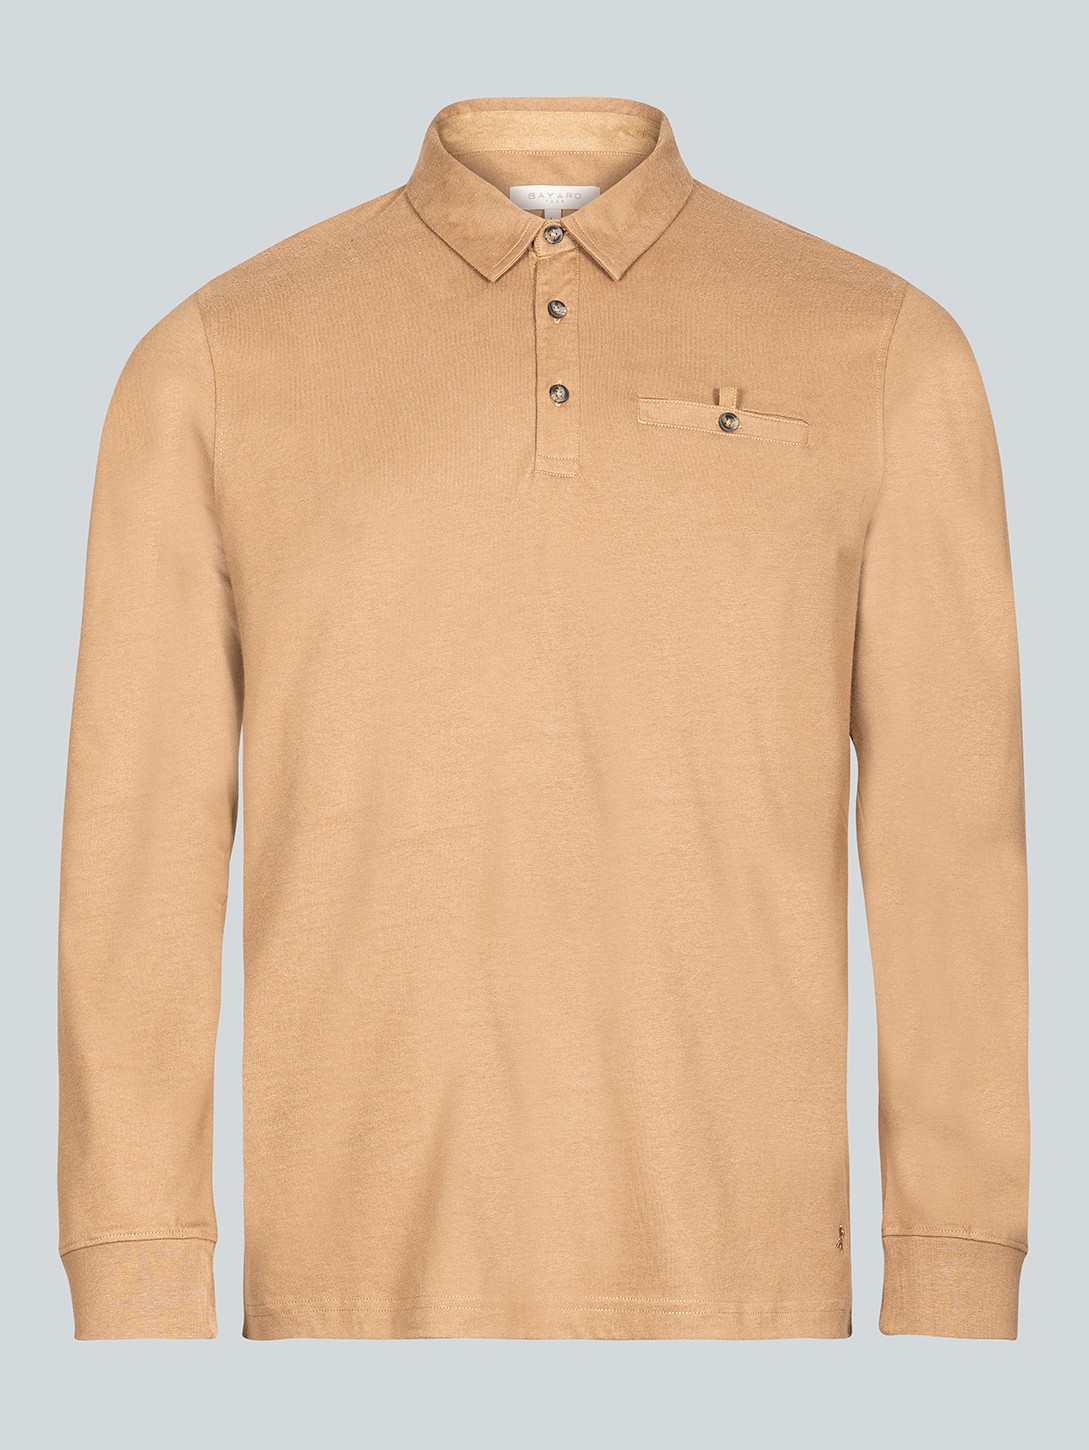 Polo manches longues camel col chemise